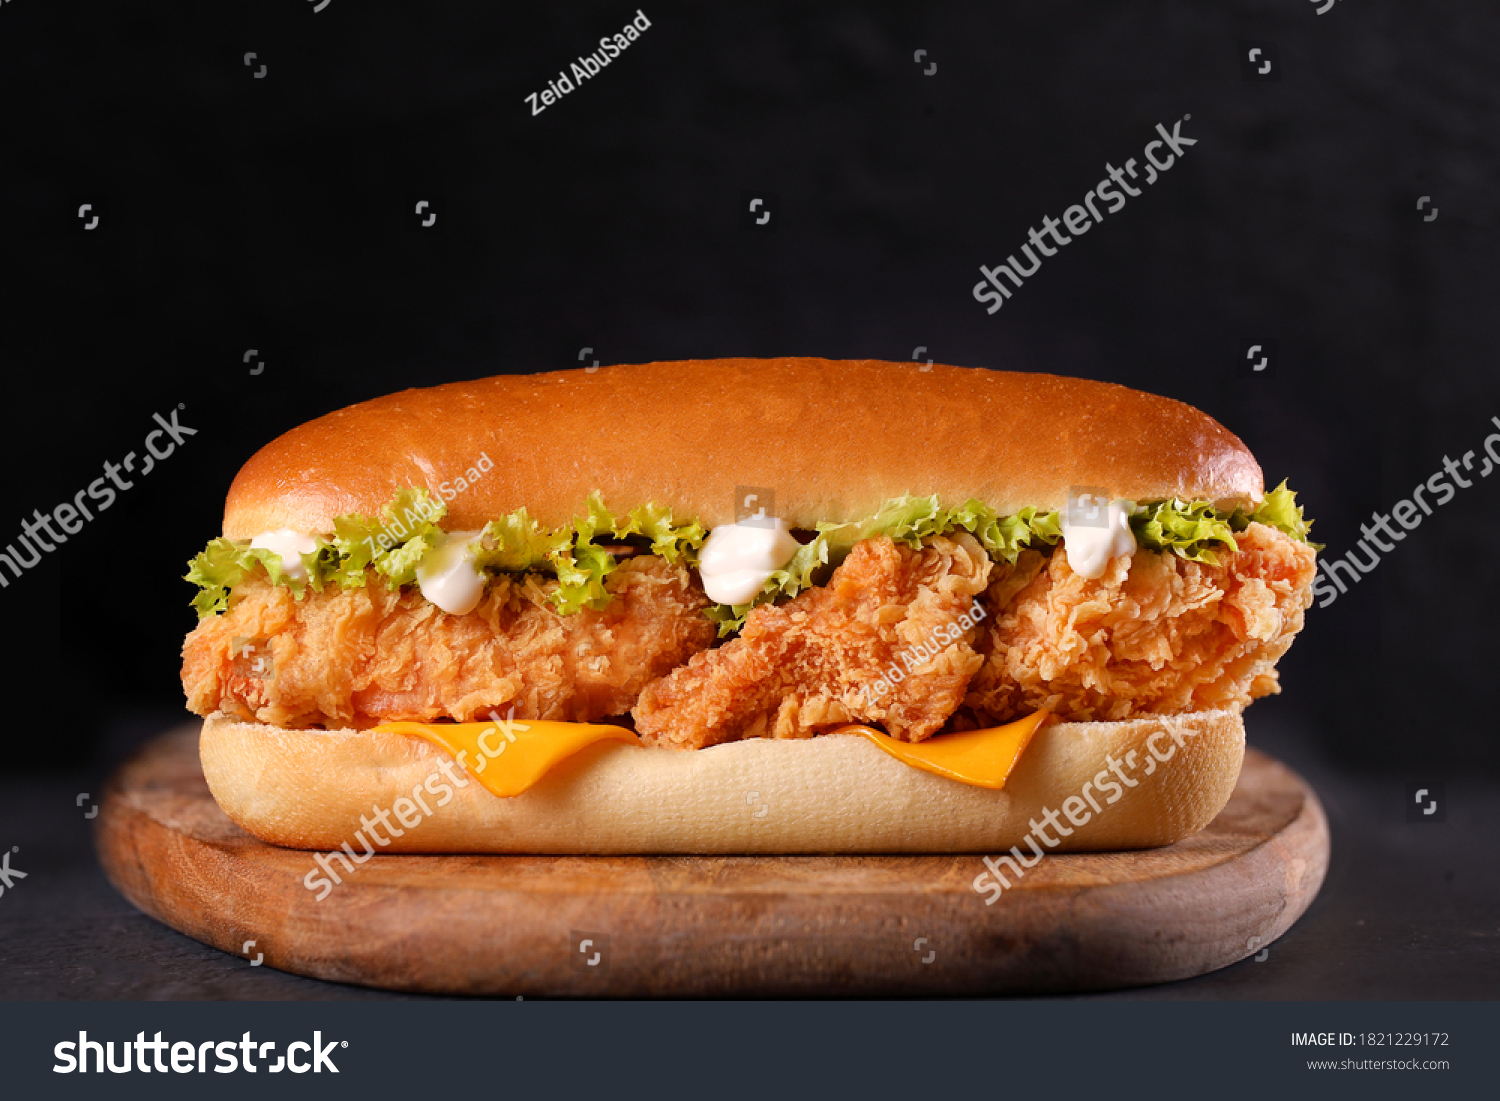  Fried chicken sandwich with lettuce and mayo #1821229172